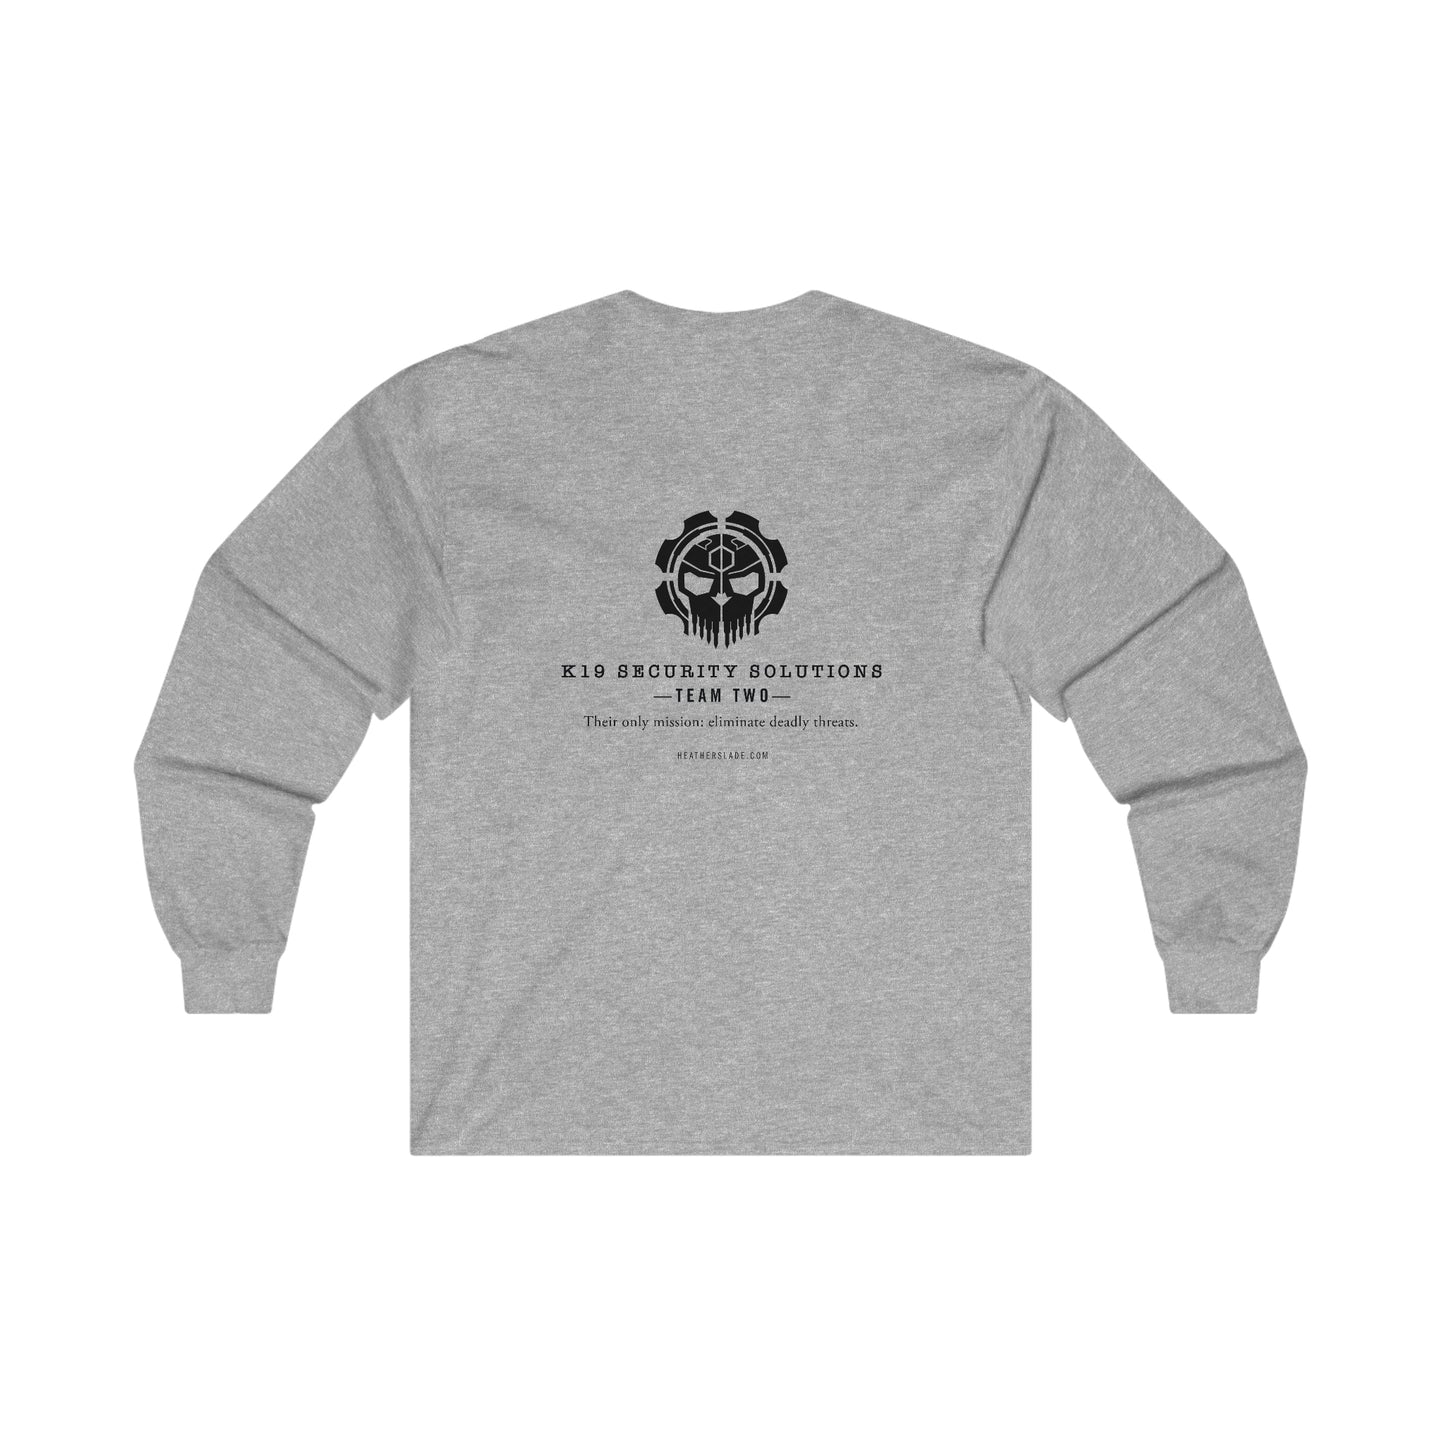 K19 Security Solutions Team Two Ultra Cotton Long Sleeve Tee